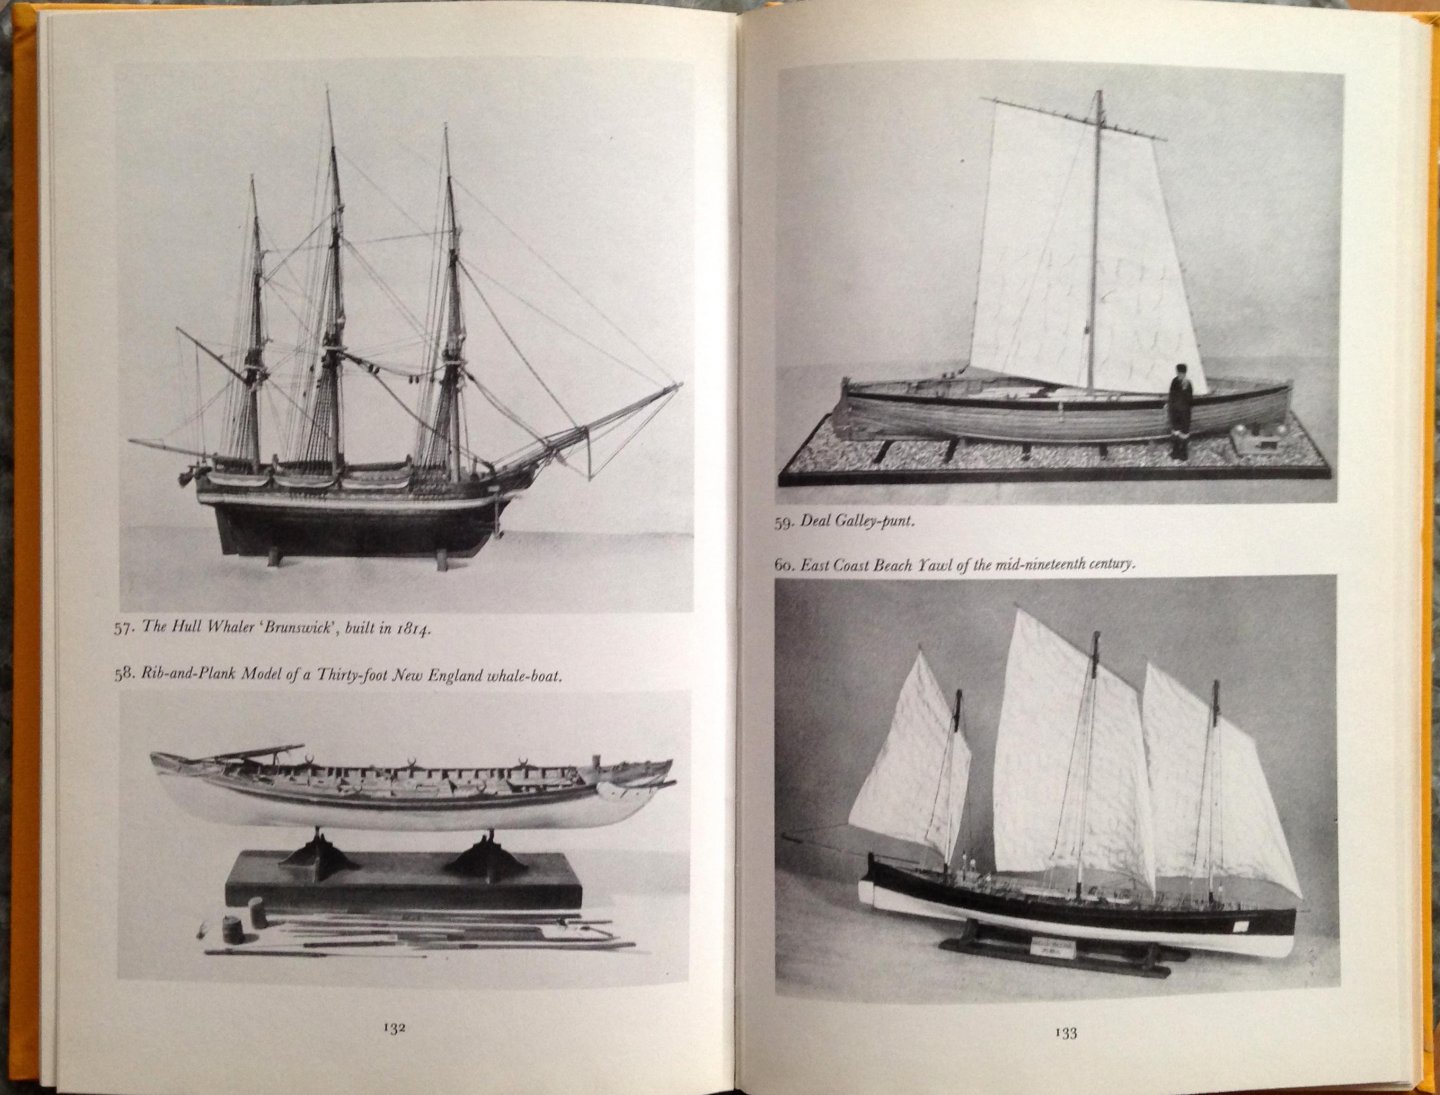 Fox Smith, C. - Ship Models - illustrated with 48 pages of photographs